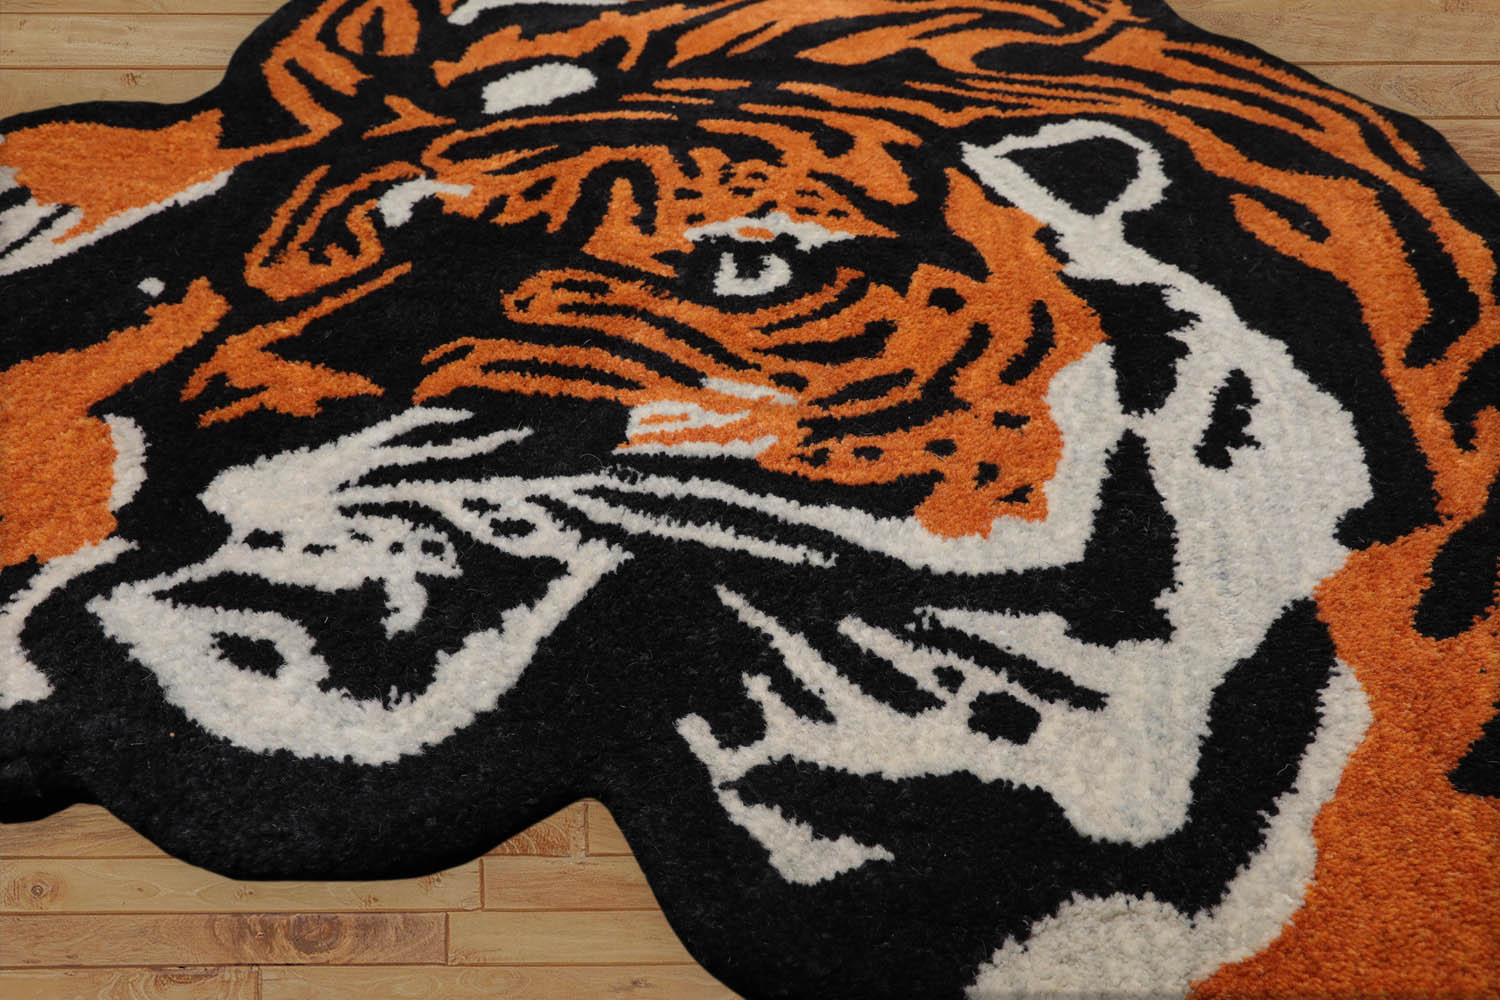 Gilbertsville 3x5 Hand Tufted Hand Made 100% Wool Crouching Tiger Traditional Oriental Area Rug Orange, Black Color